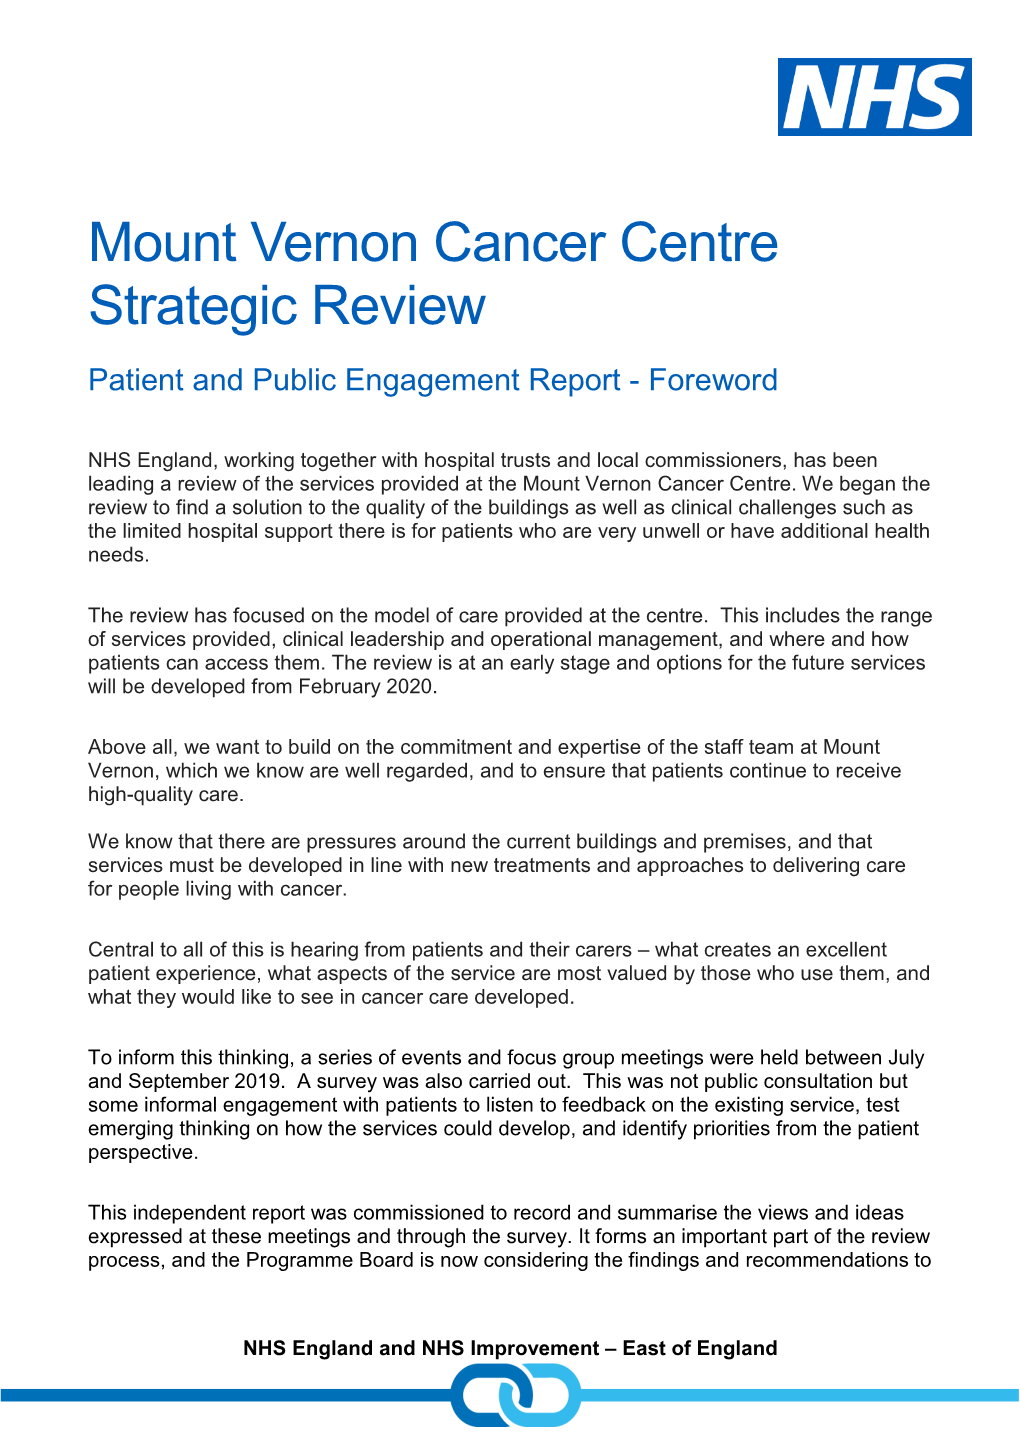 Mount Vernon Cancer Centre Strategic Review Patient and Public Engagement Report - Foreword